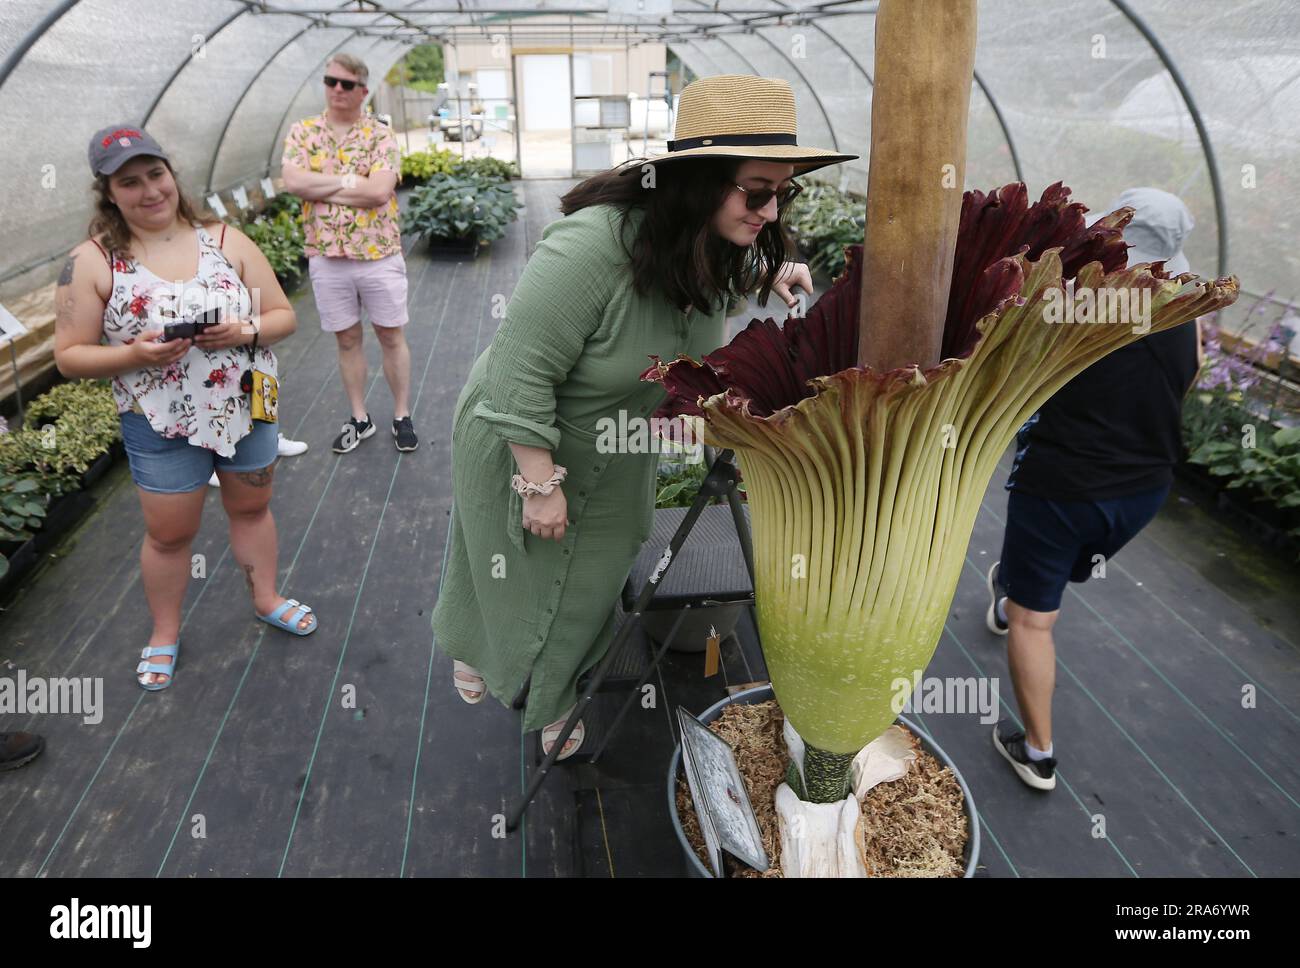 July 1, 2023, Raleigh, North Carolina, USA: EMMA HEPWORTH takes a sniff of ''˜HOMO ERECTUS, ' a rare corpse flower during the second day of its bloom at Juniper Level Botanical Garden in Raleigh, NC. Amorphophallus titanum is one of the biggest, stinkiest flowers in the plant kingdom and is commonly known as the corpse flower due to its smell of rotting flesh as it blooms. It typically takes 7-10 years of vegetative growth before the corpse flower blooms for a total of 2-3 days. The flower is so rare that fewer than 1,000 Titan Arums have flowered in cultivation worldwide. (Credit Image: © Bo Stock Photo